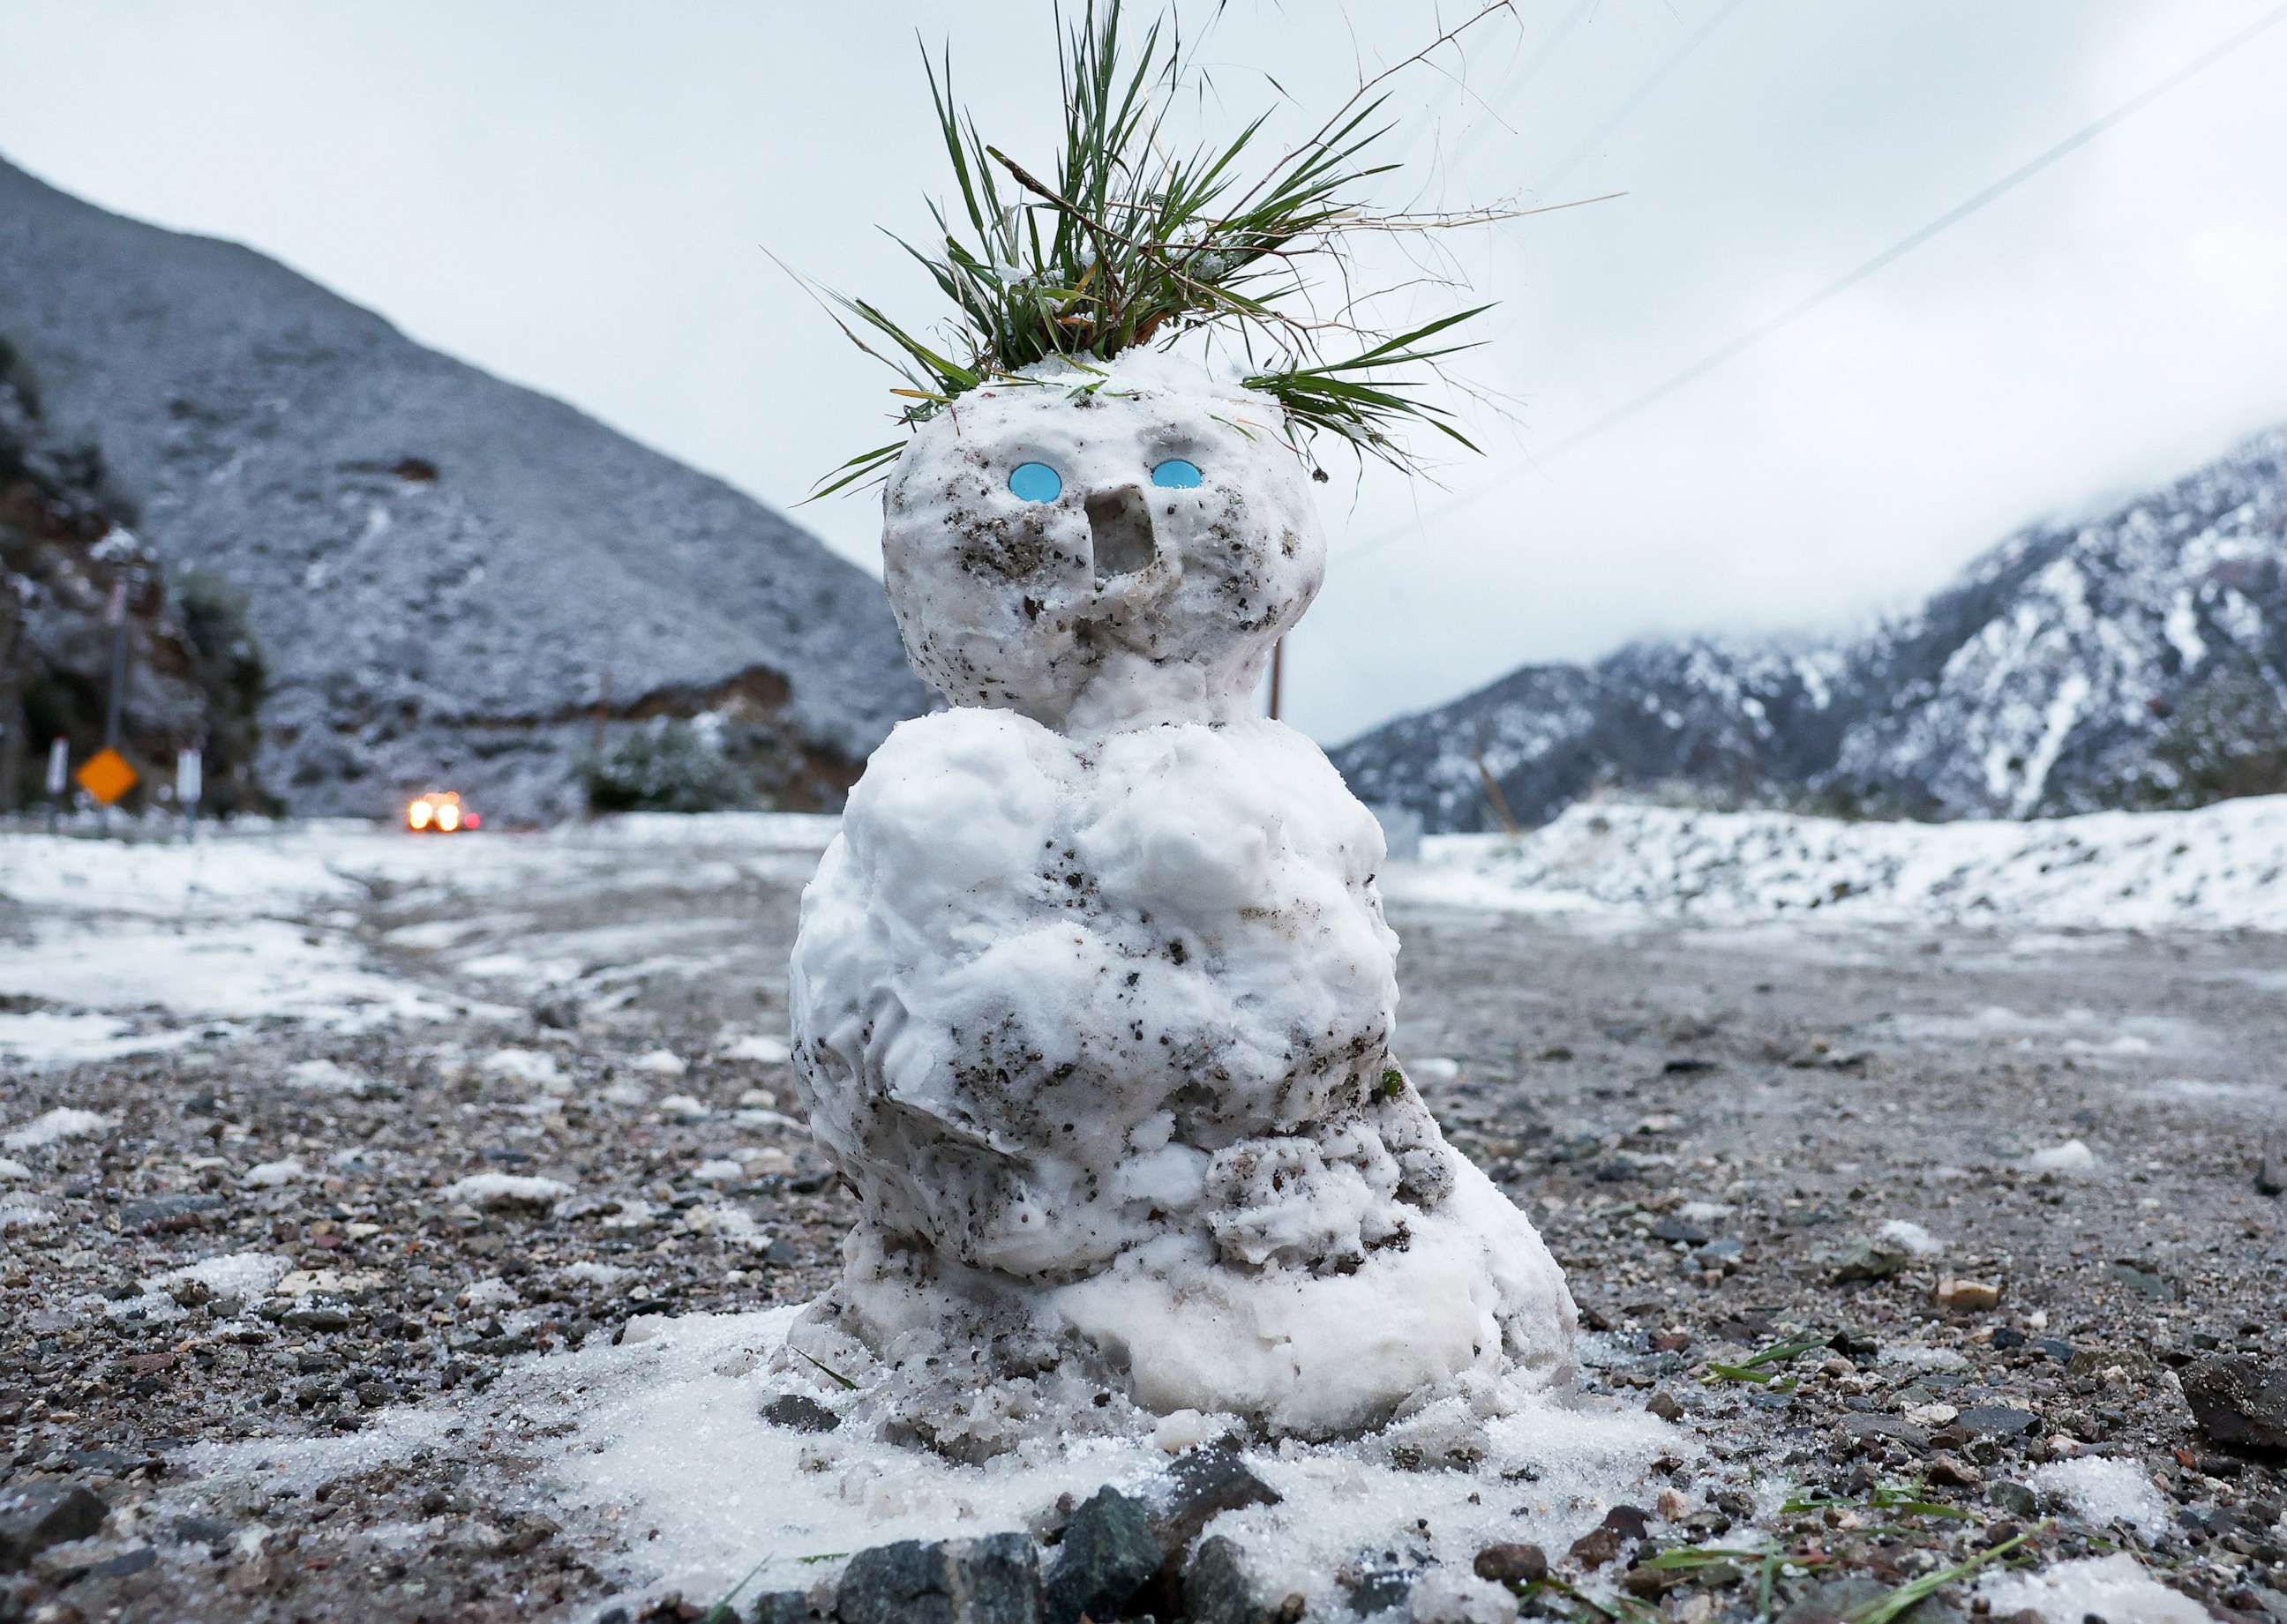 PHOTO: A snowman stands as snow blankets the Angeles National Forest in Los Angeles County on February 23, 2023 near Claremont, California.